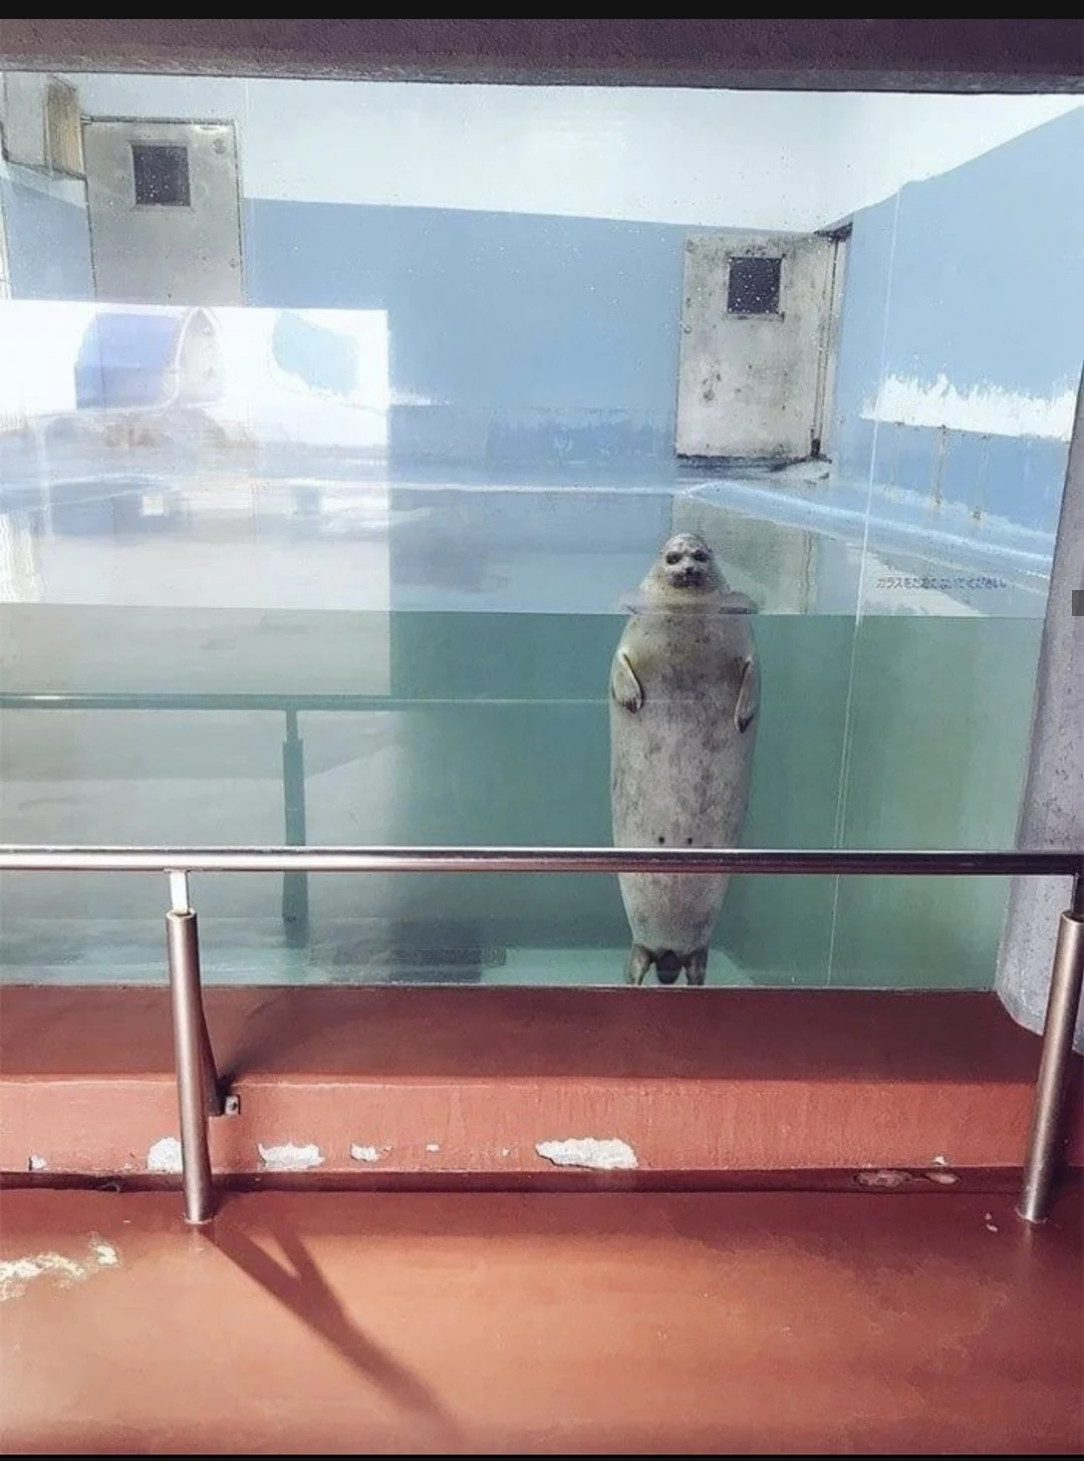 This seal in its inside tank